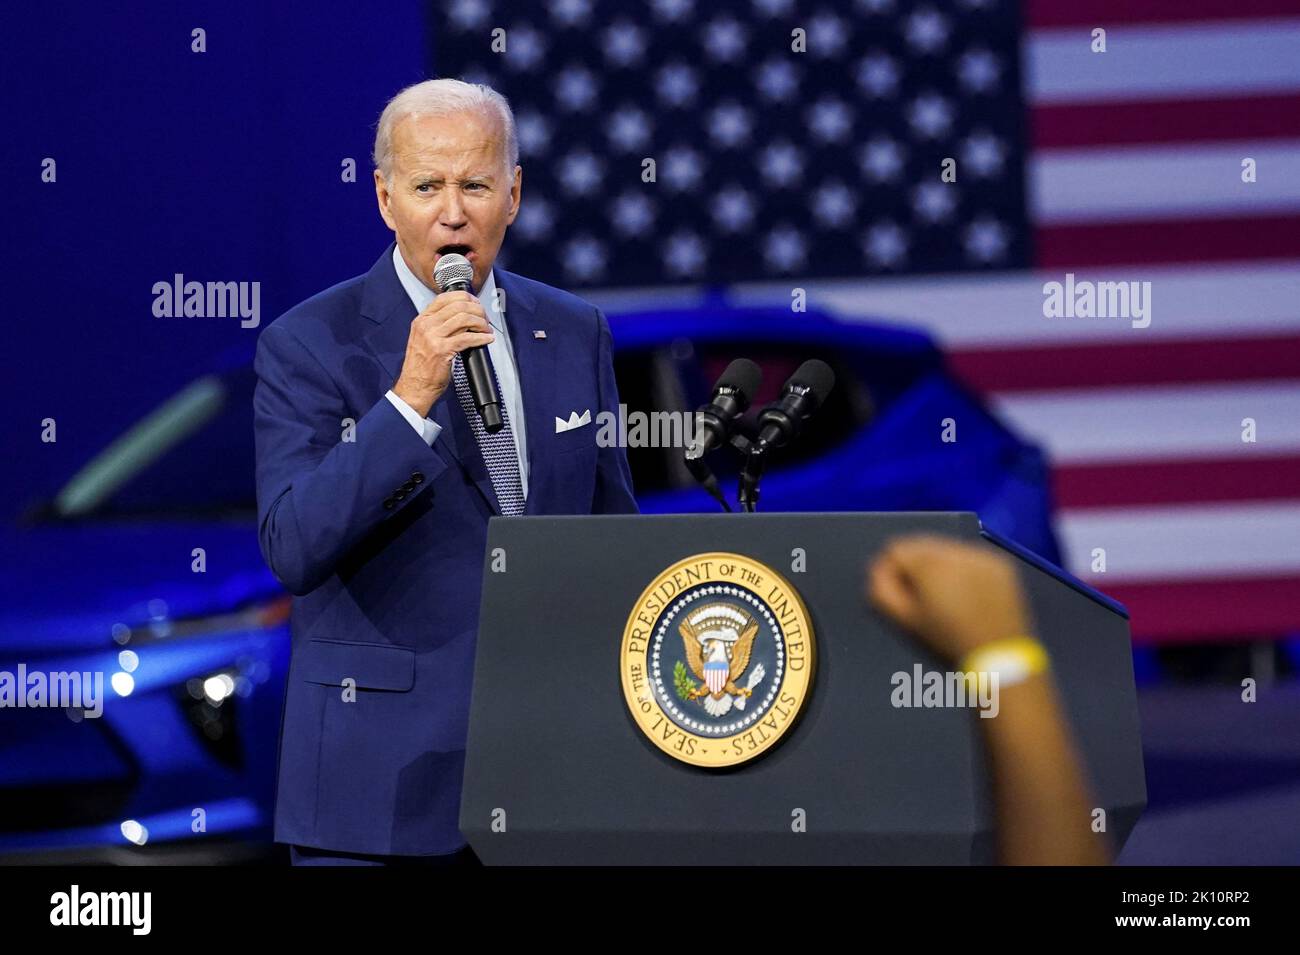 U.S. President Joe Biden is cheered as he delivers remarks during a visit to the Detroit Auto Show in Detroit, Michigan, U.S., September 14, 2022. REUTERS/Kevin Lamarque Stock Photo